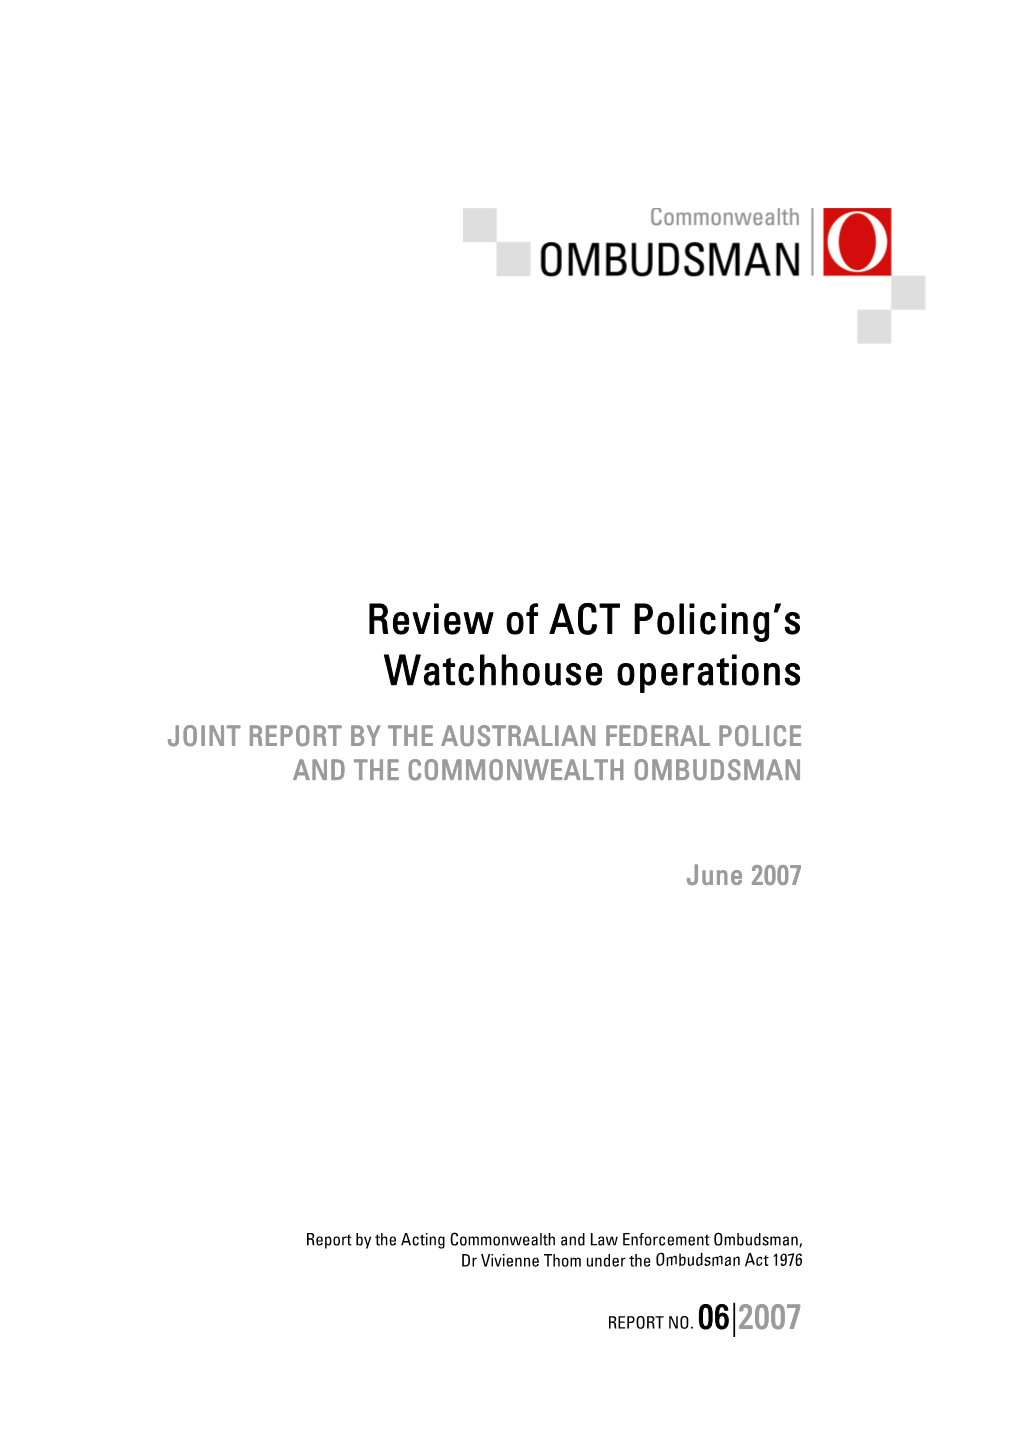 Review of ACT Policing's Watchhouse Operations